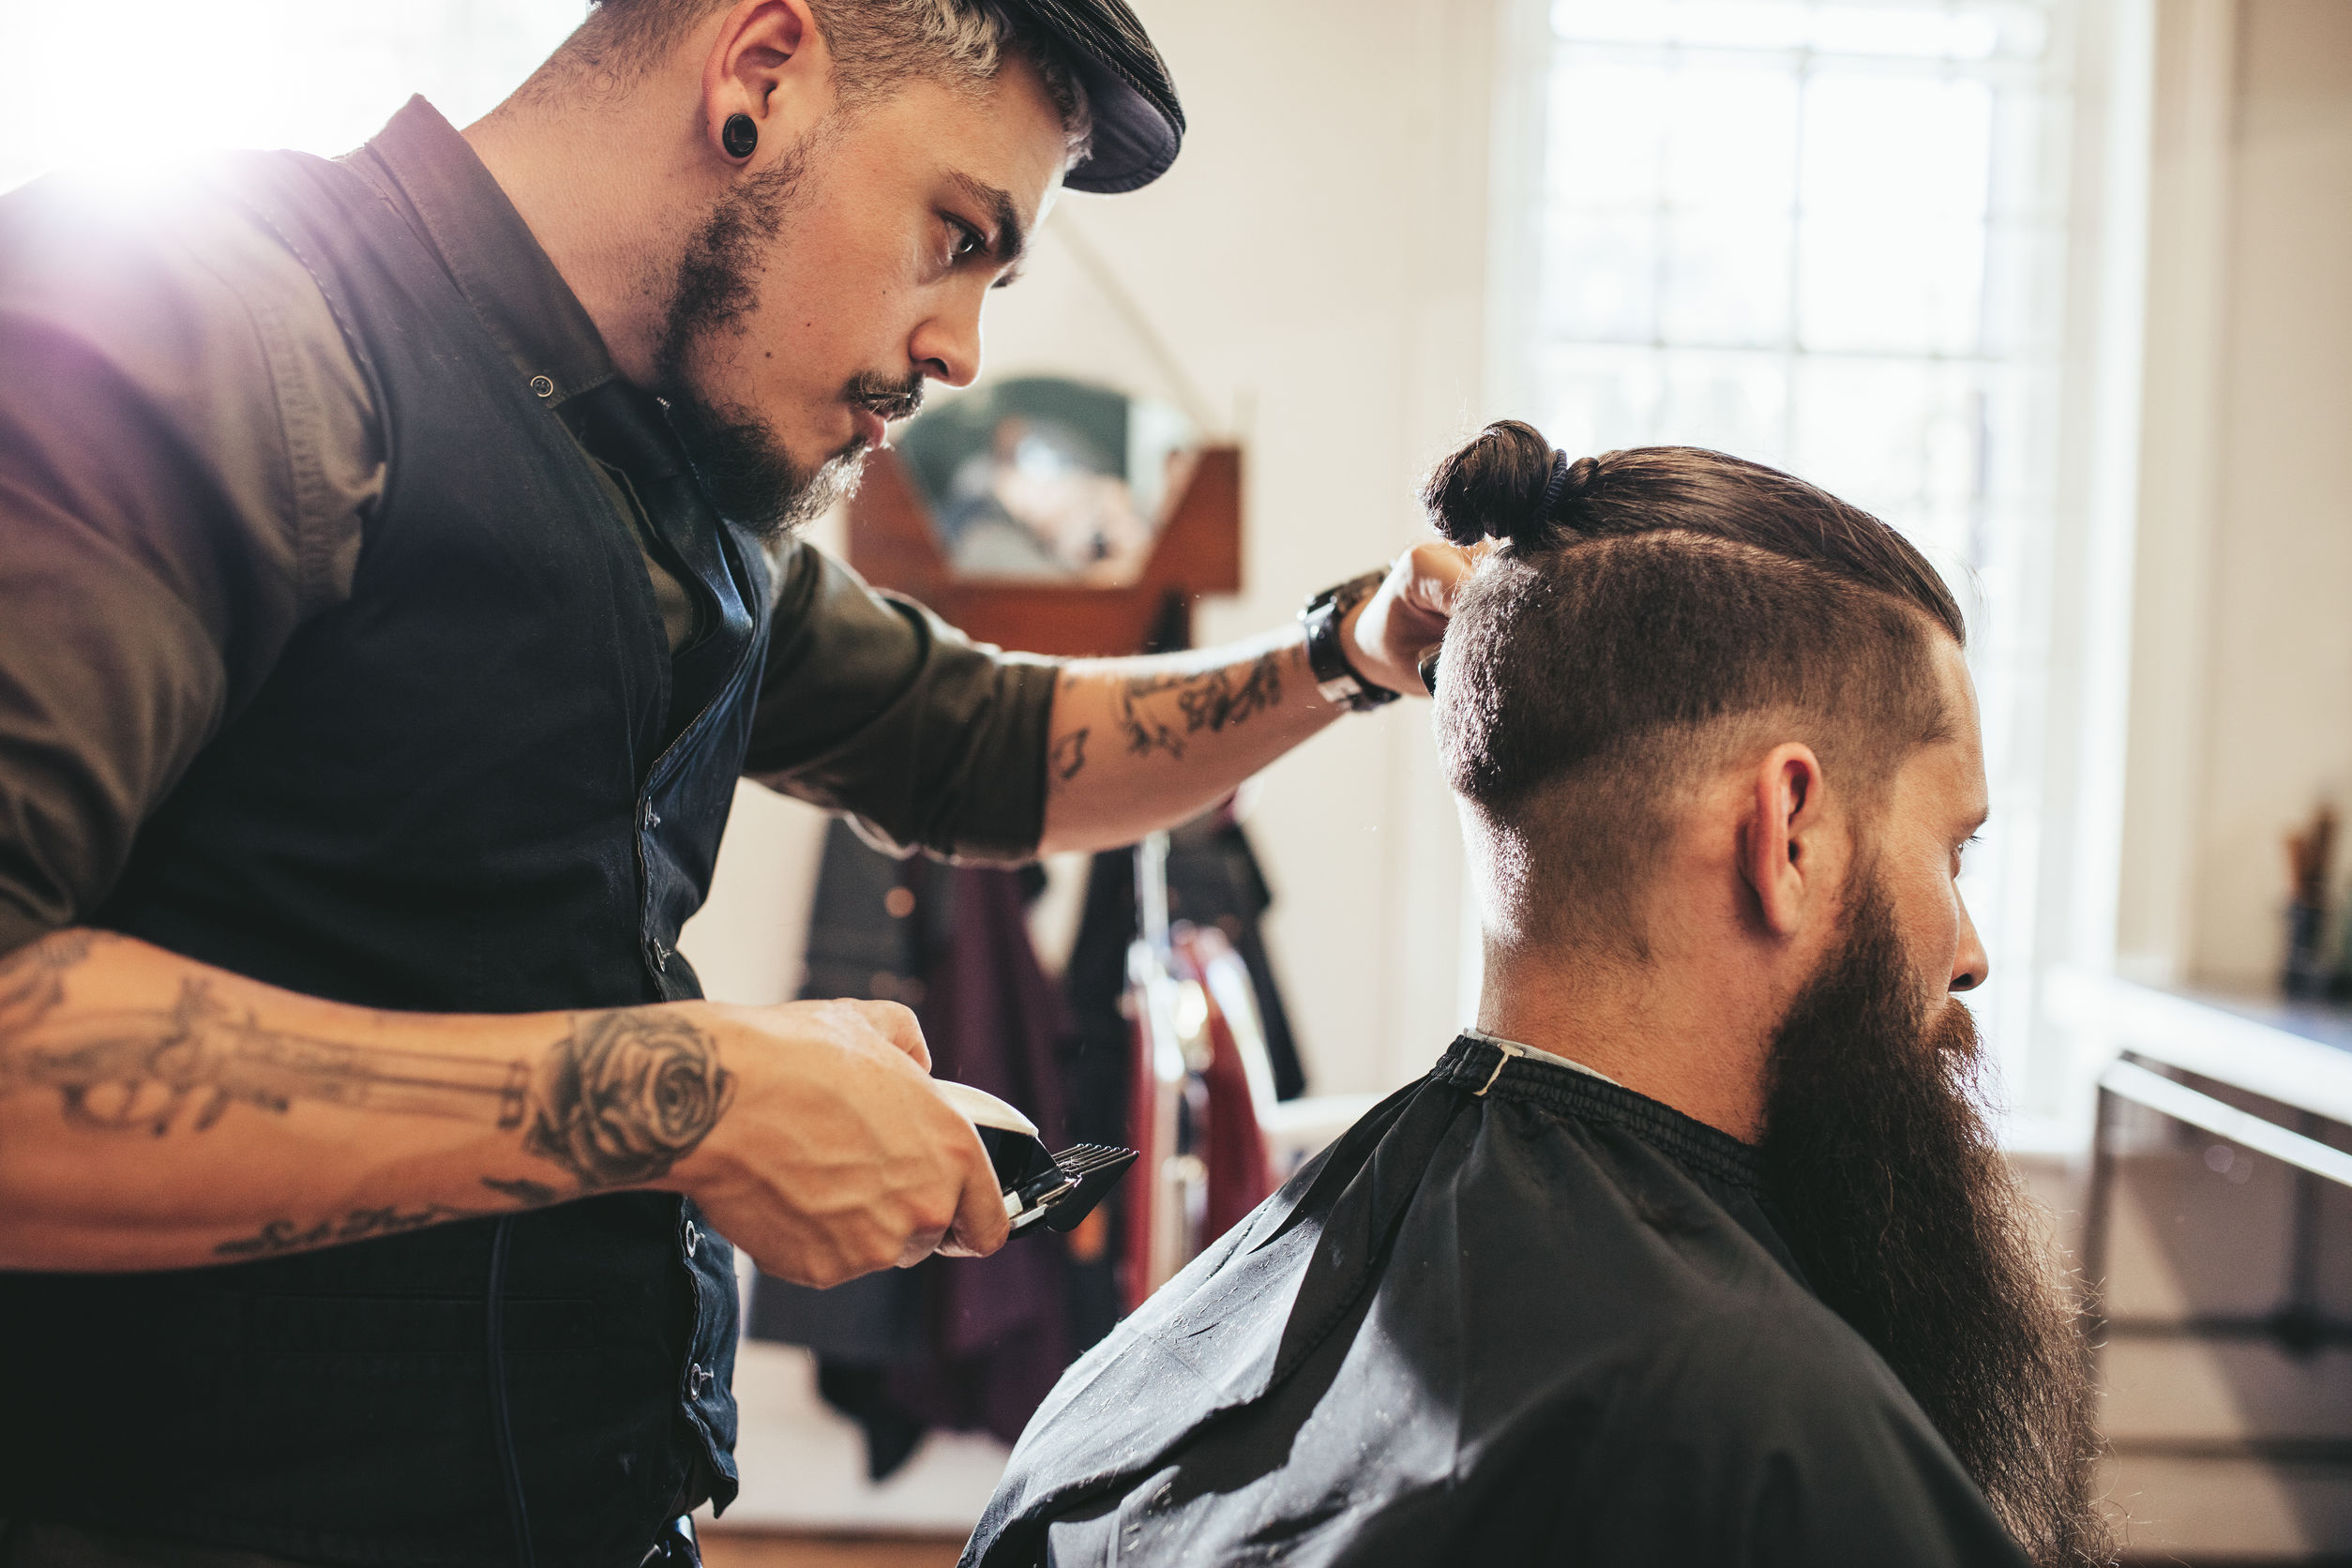 What is currently the most trendy men's haircut? - Quora